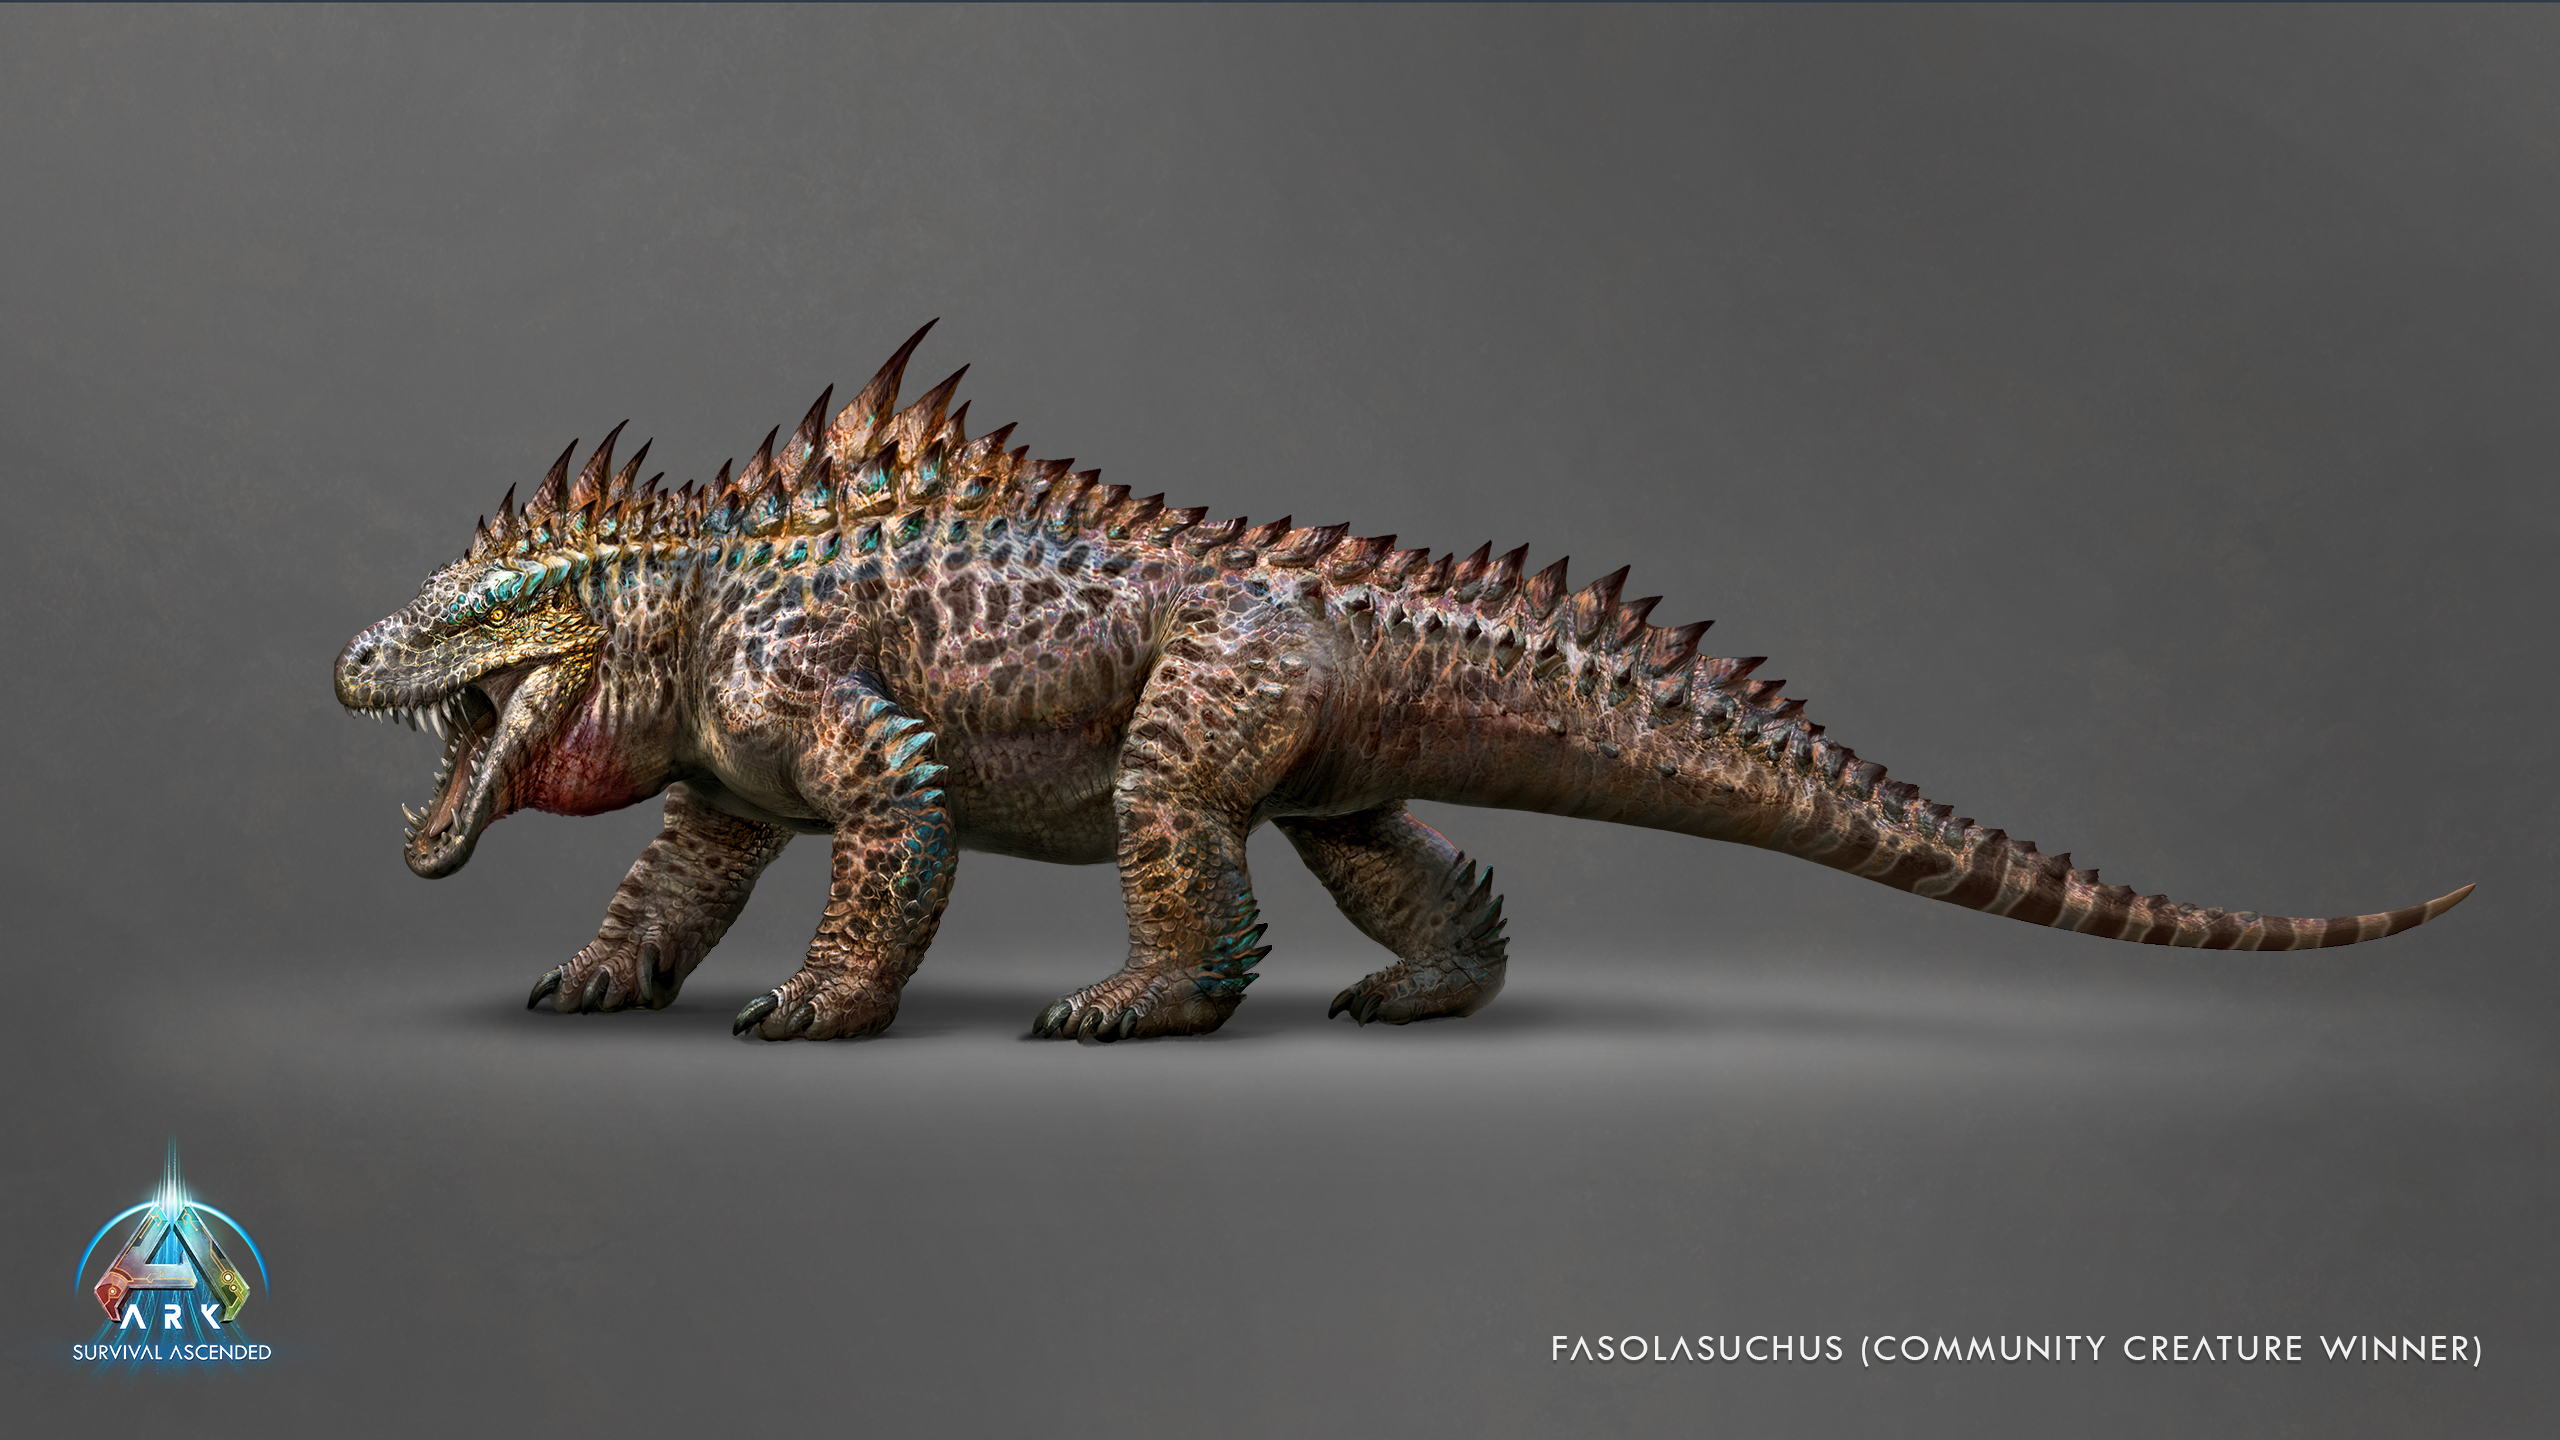 ARK: Survival Ascended on X: As we continue our journey towards ARK:  Survival Ascended, Fasolasuchus is the first of many new additions and  reveals coming your way. With over 49k votes, Fasolasuchus